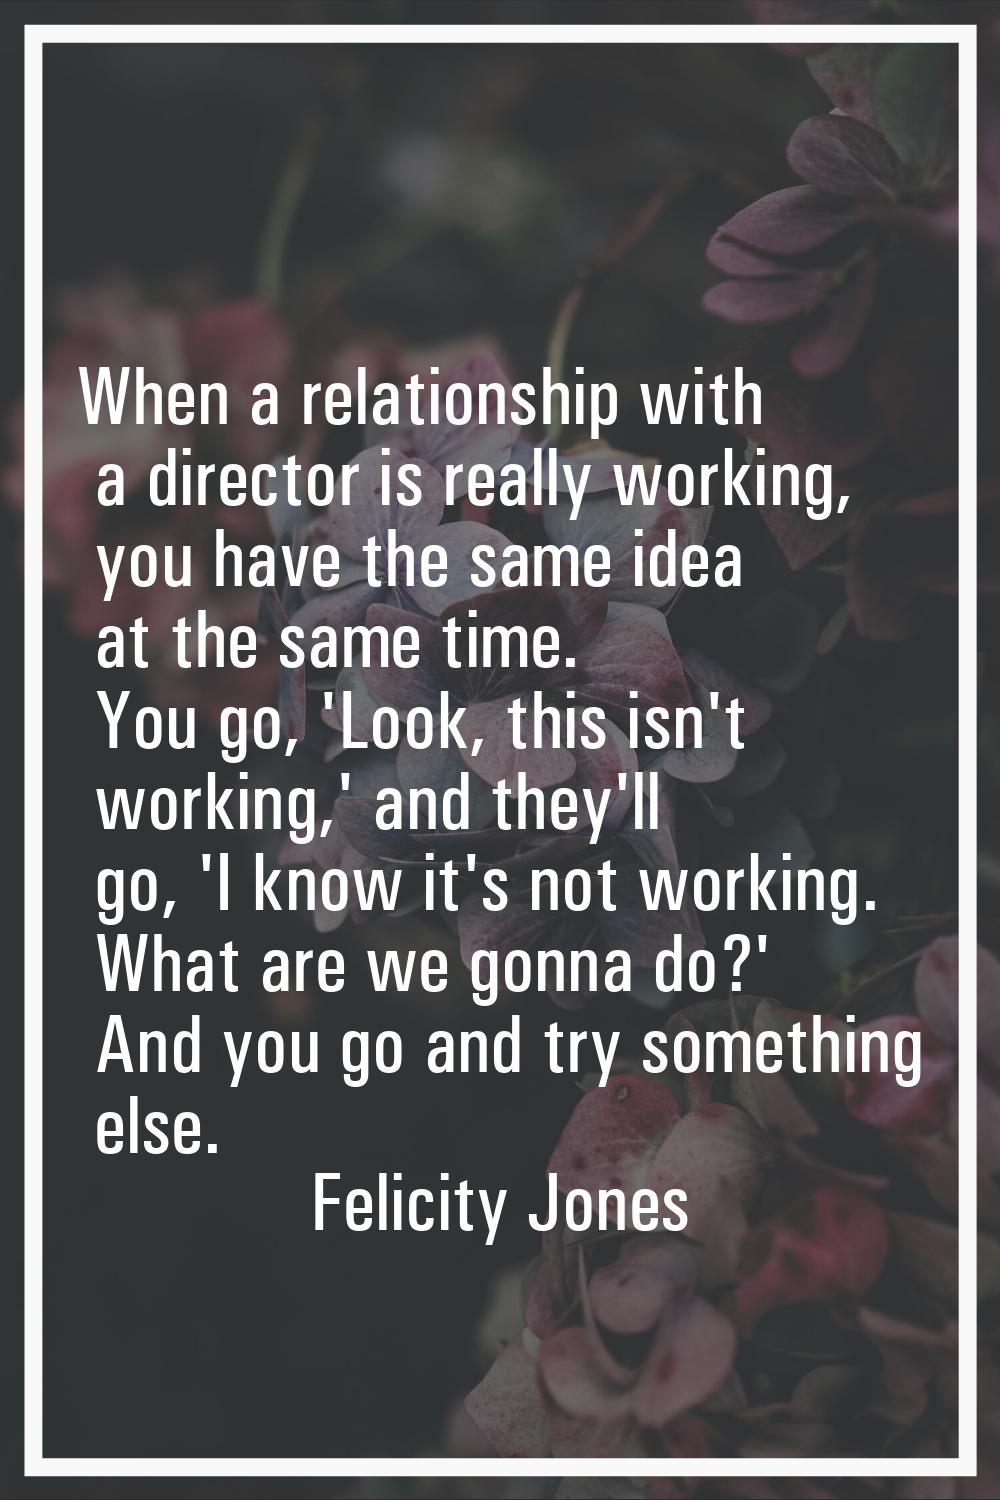 When a relationship with a director is really working, you have the same idea at the same time. You